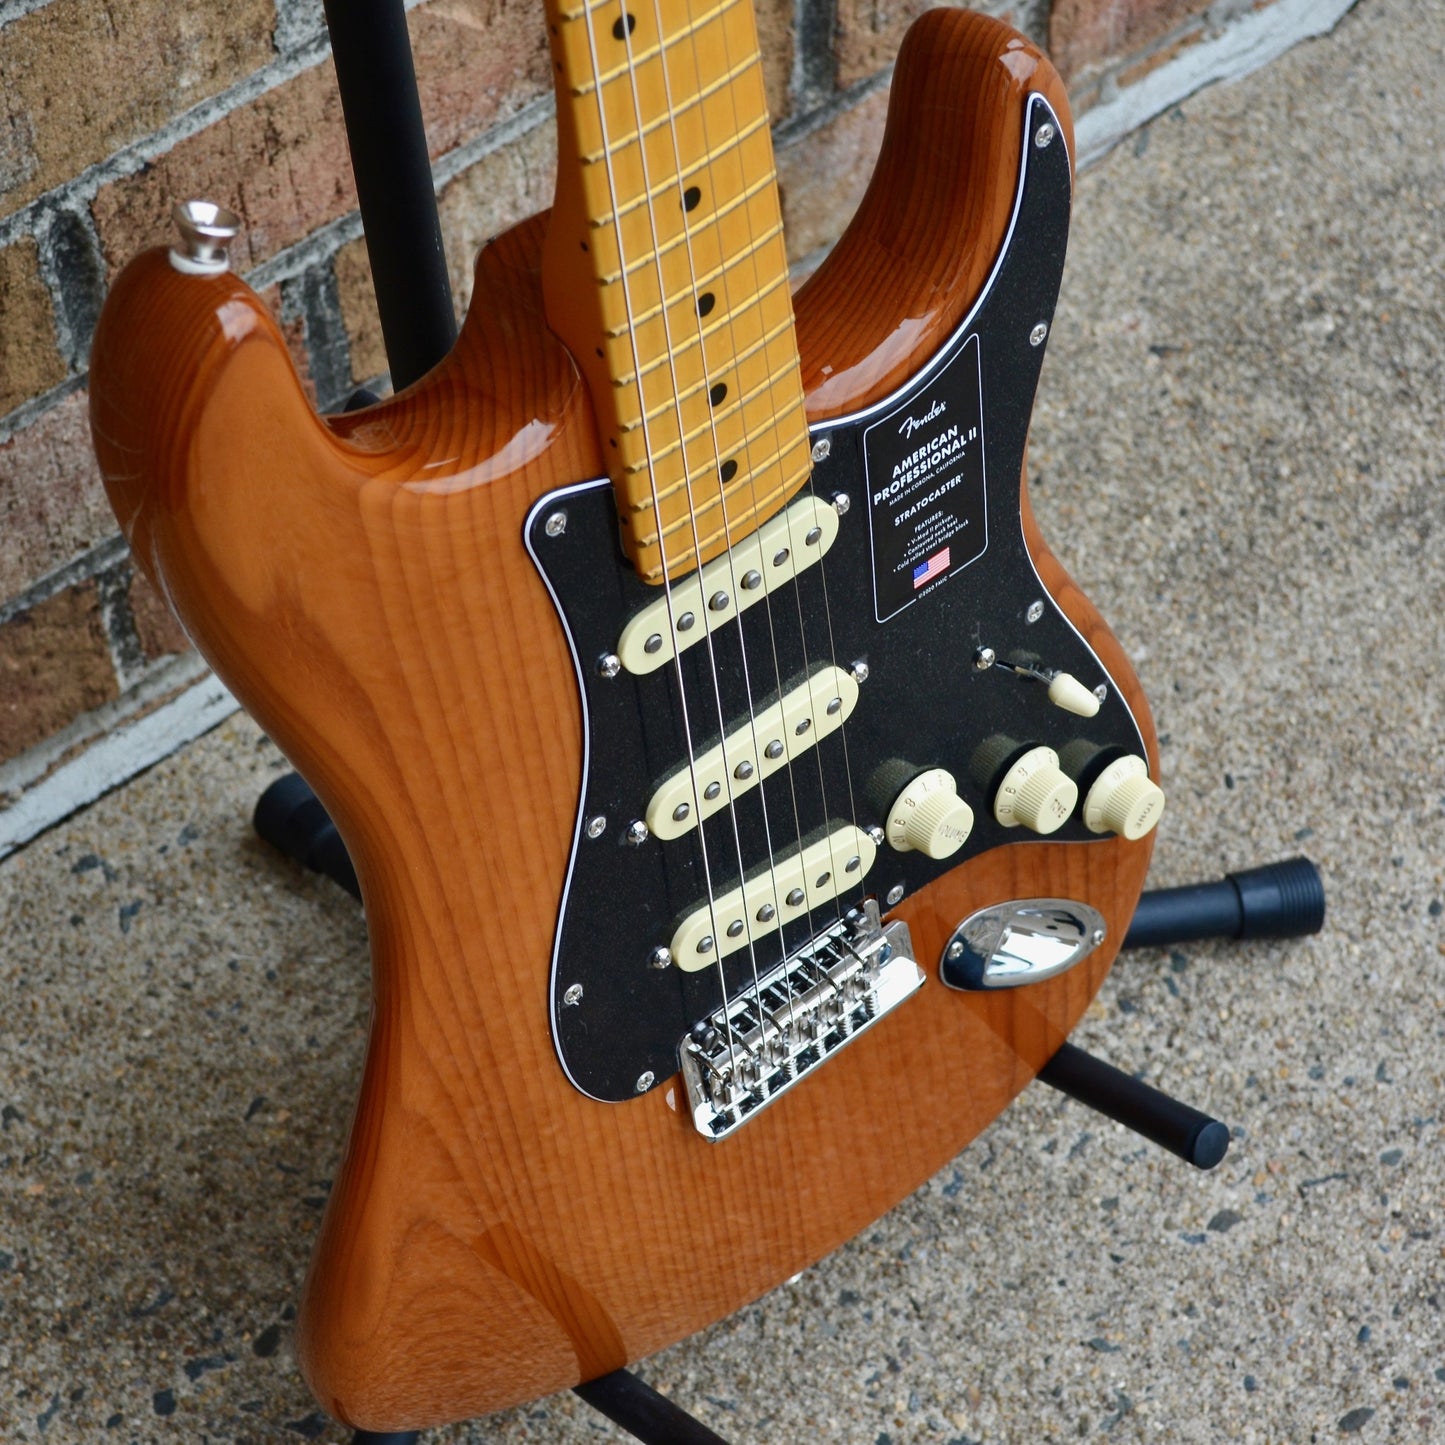 Fender American Professional II Stratocaster®, Maple Fingerboard, Roasted Pine